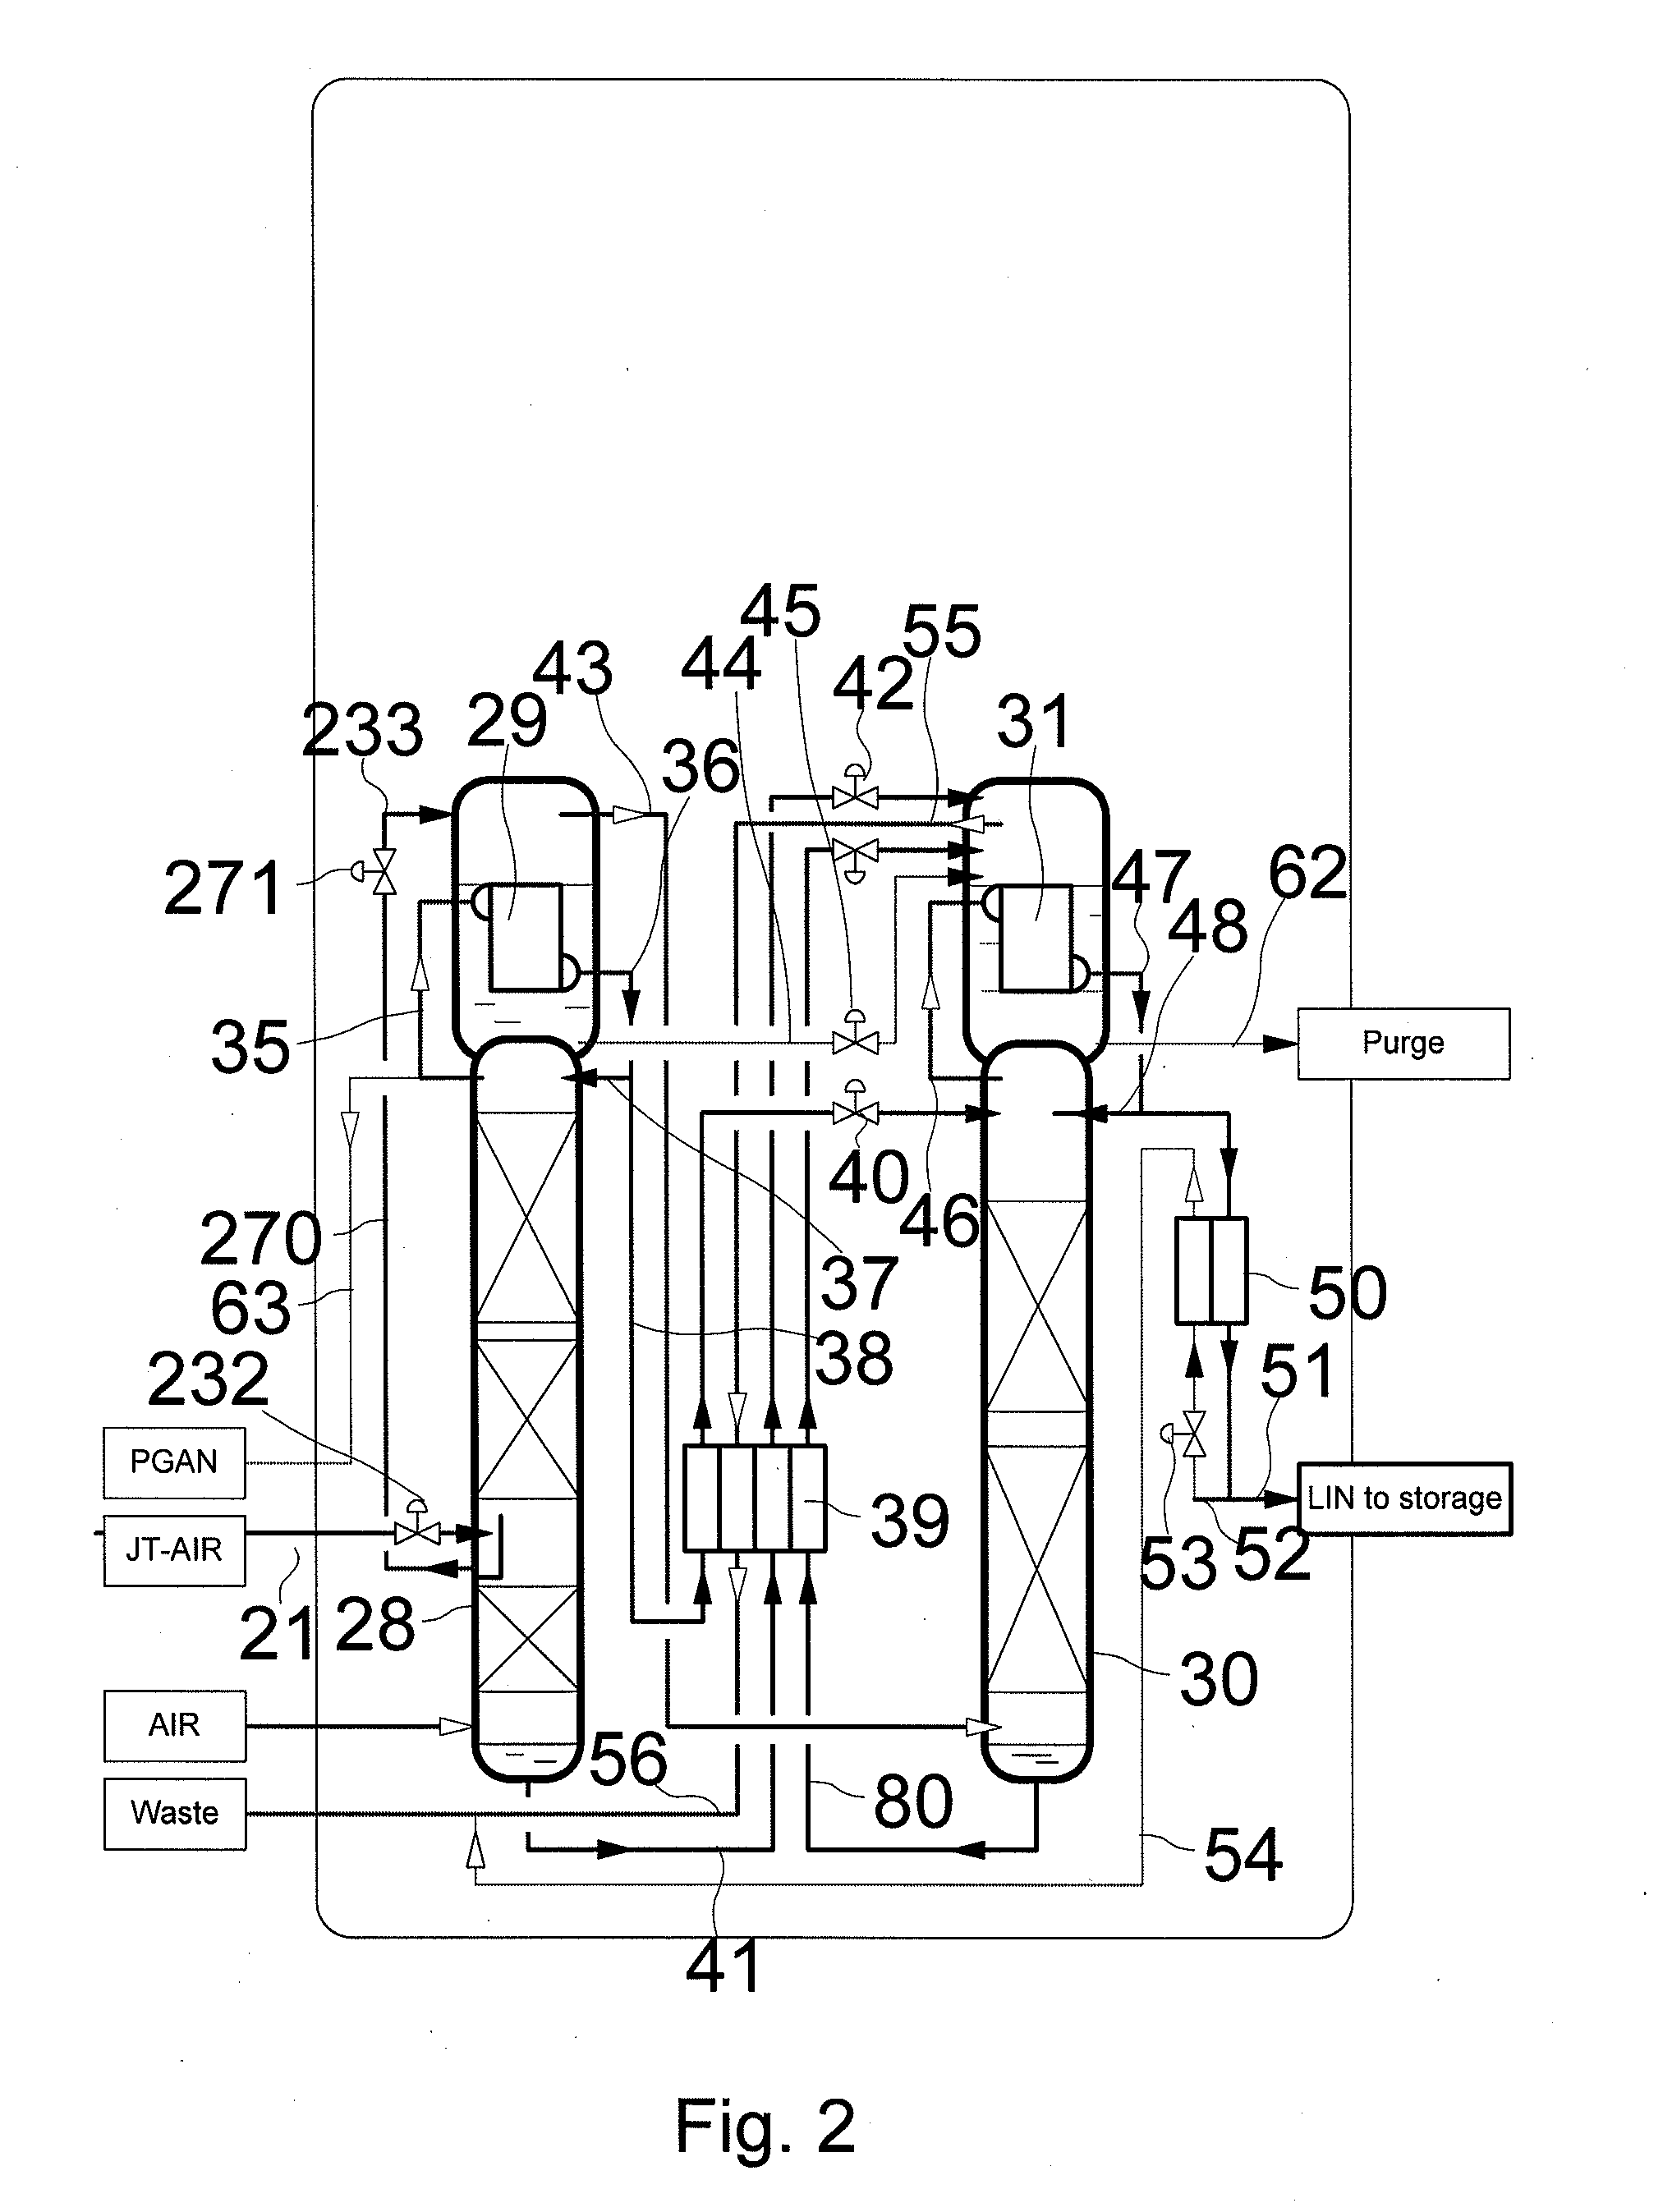 Process and Device for Obtaining Liquid Nitrogen by Low Temperature Air Fractionation